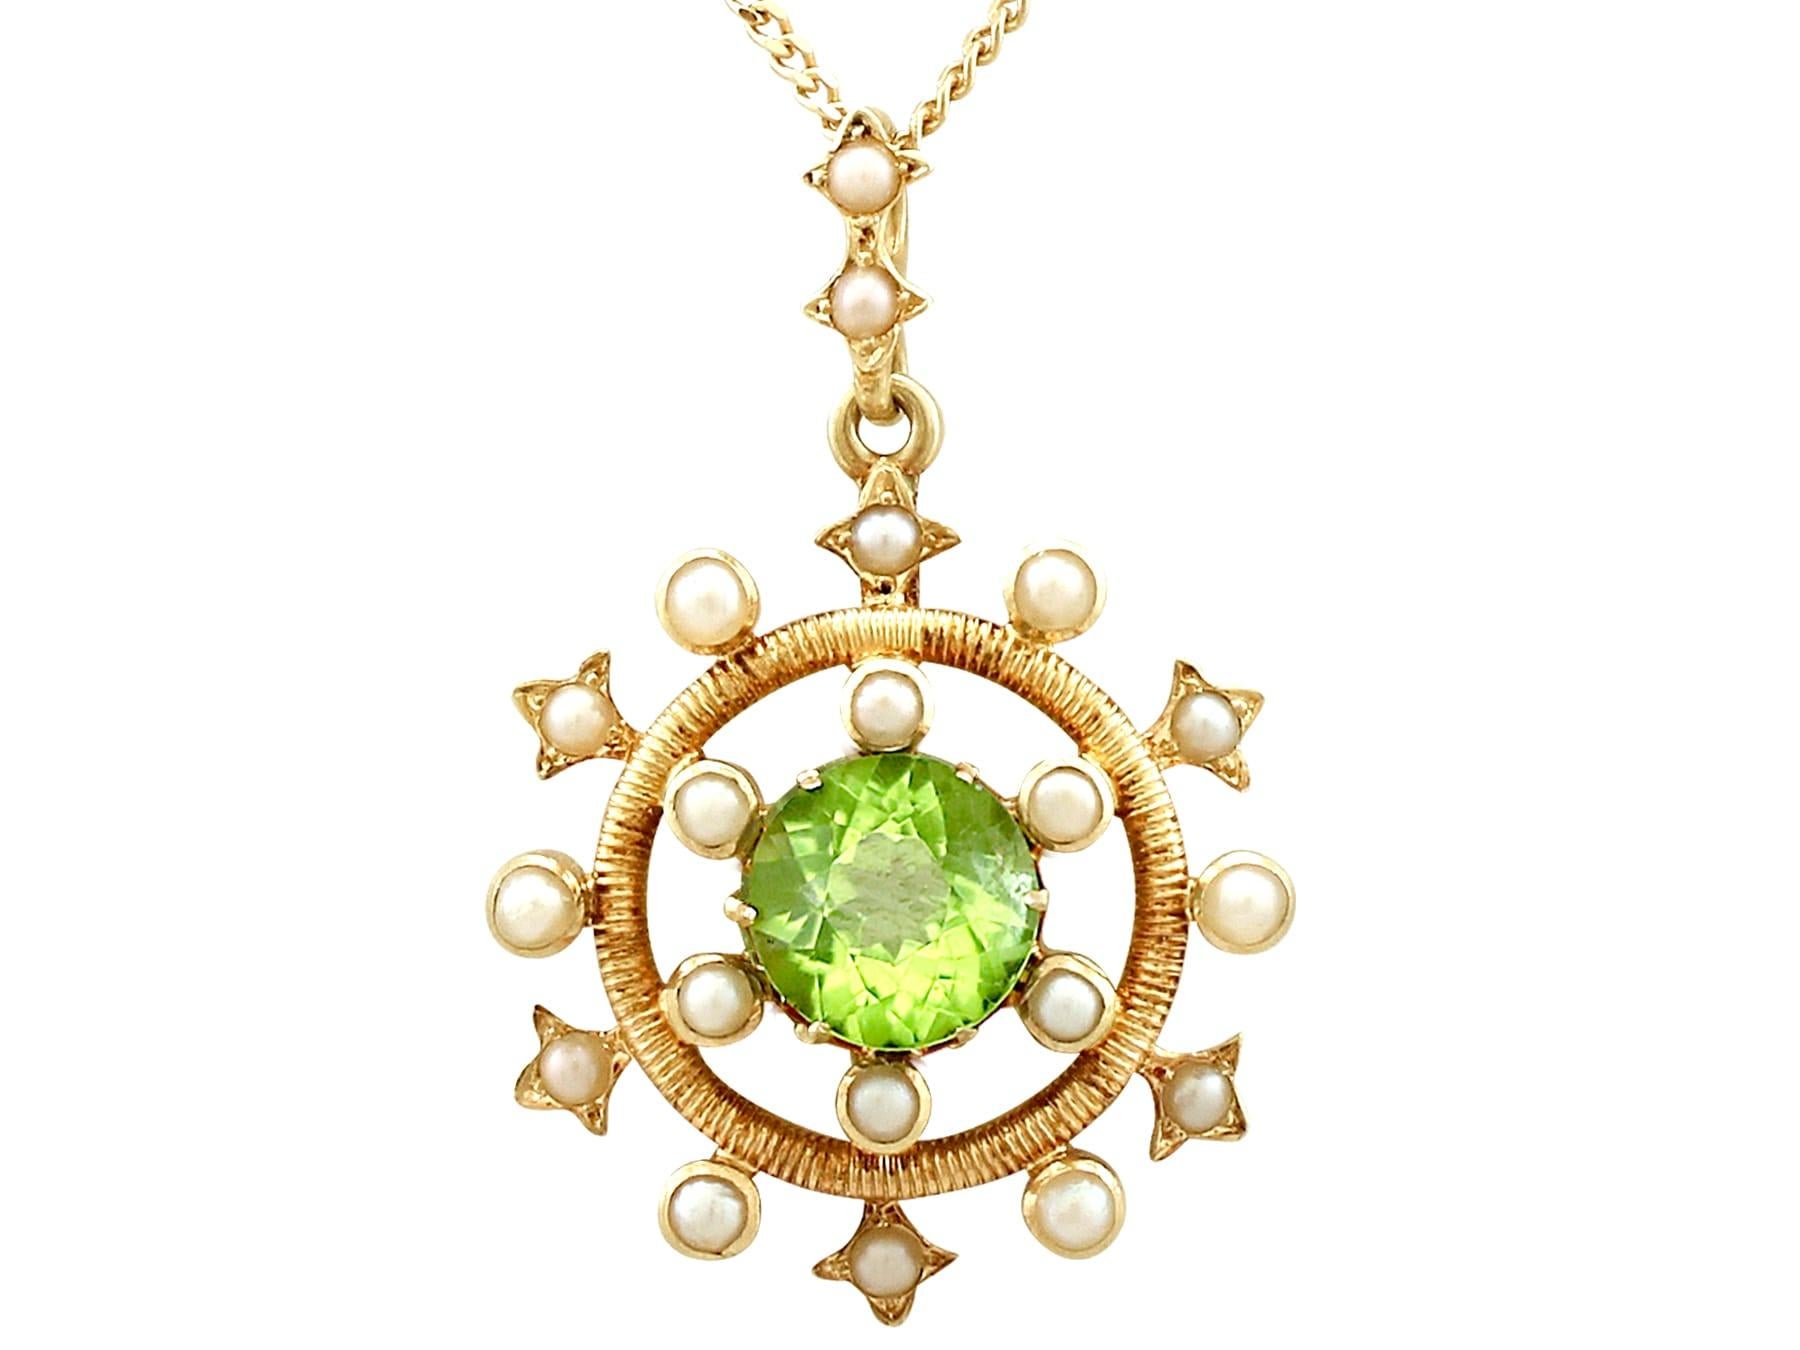 An impressive antique 1900s 1.92 carat peridot and seed pearl, 15 karat yellow gold pendant; part of our diverse antique jewelry and estate jewelry collections.

This fine and impressive antique peridot pendant with pearls has been crafted in 15k